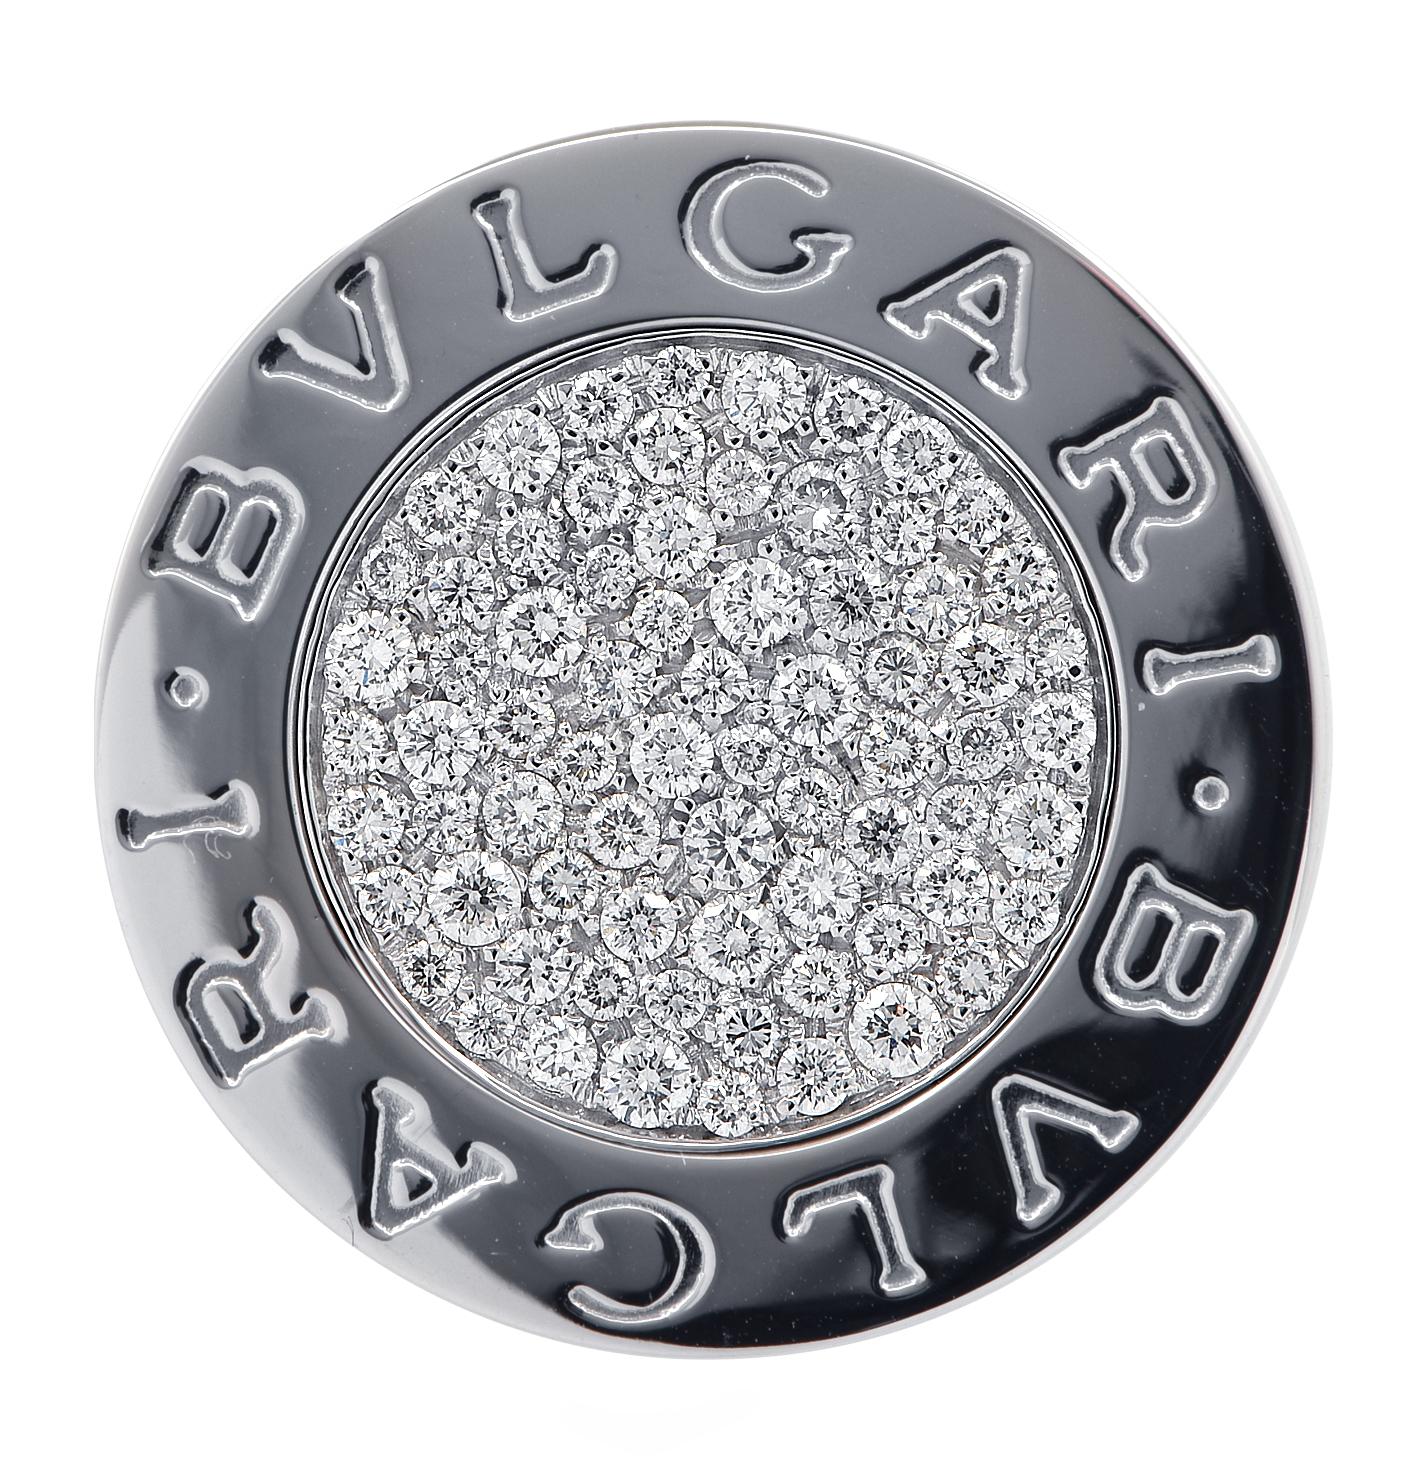 From the renowned House of Bvlgari, this stylish ring crafted in 18 karat White Gold showcases the BVLGARI double logo with an inlay featuring 75 round brilliant cut diamonds weighing approximately 1.5 carats total, F color, VS clarity, pave set.